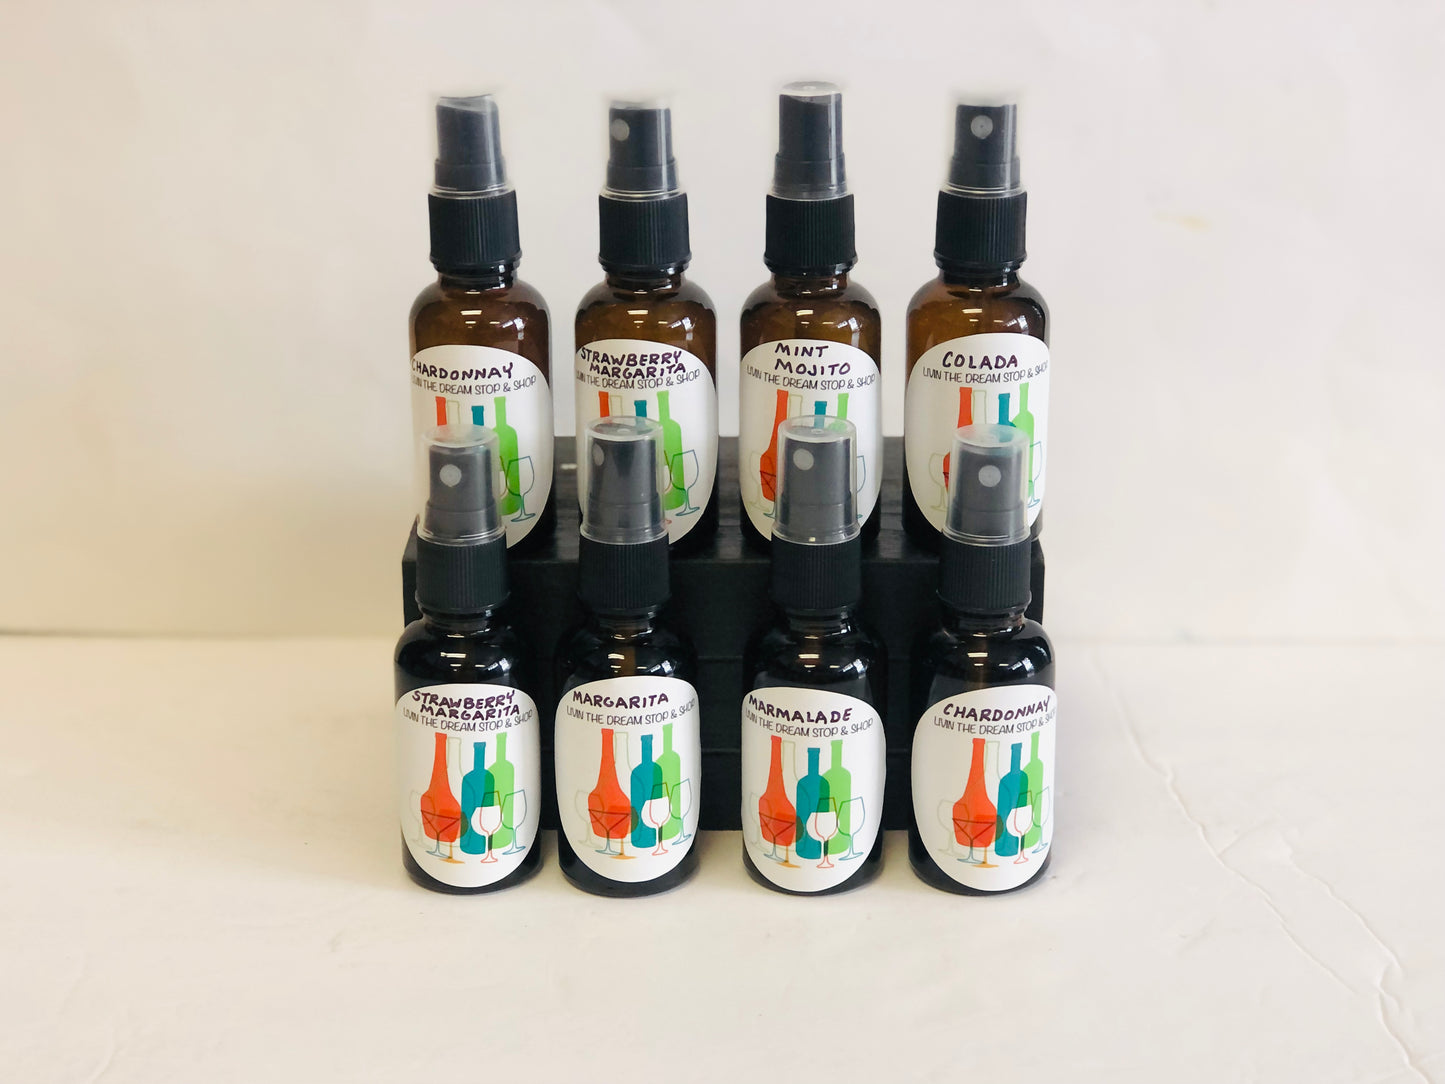 Room/Body Sprays Cocktail Scents-By Miss Marie!